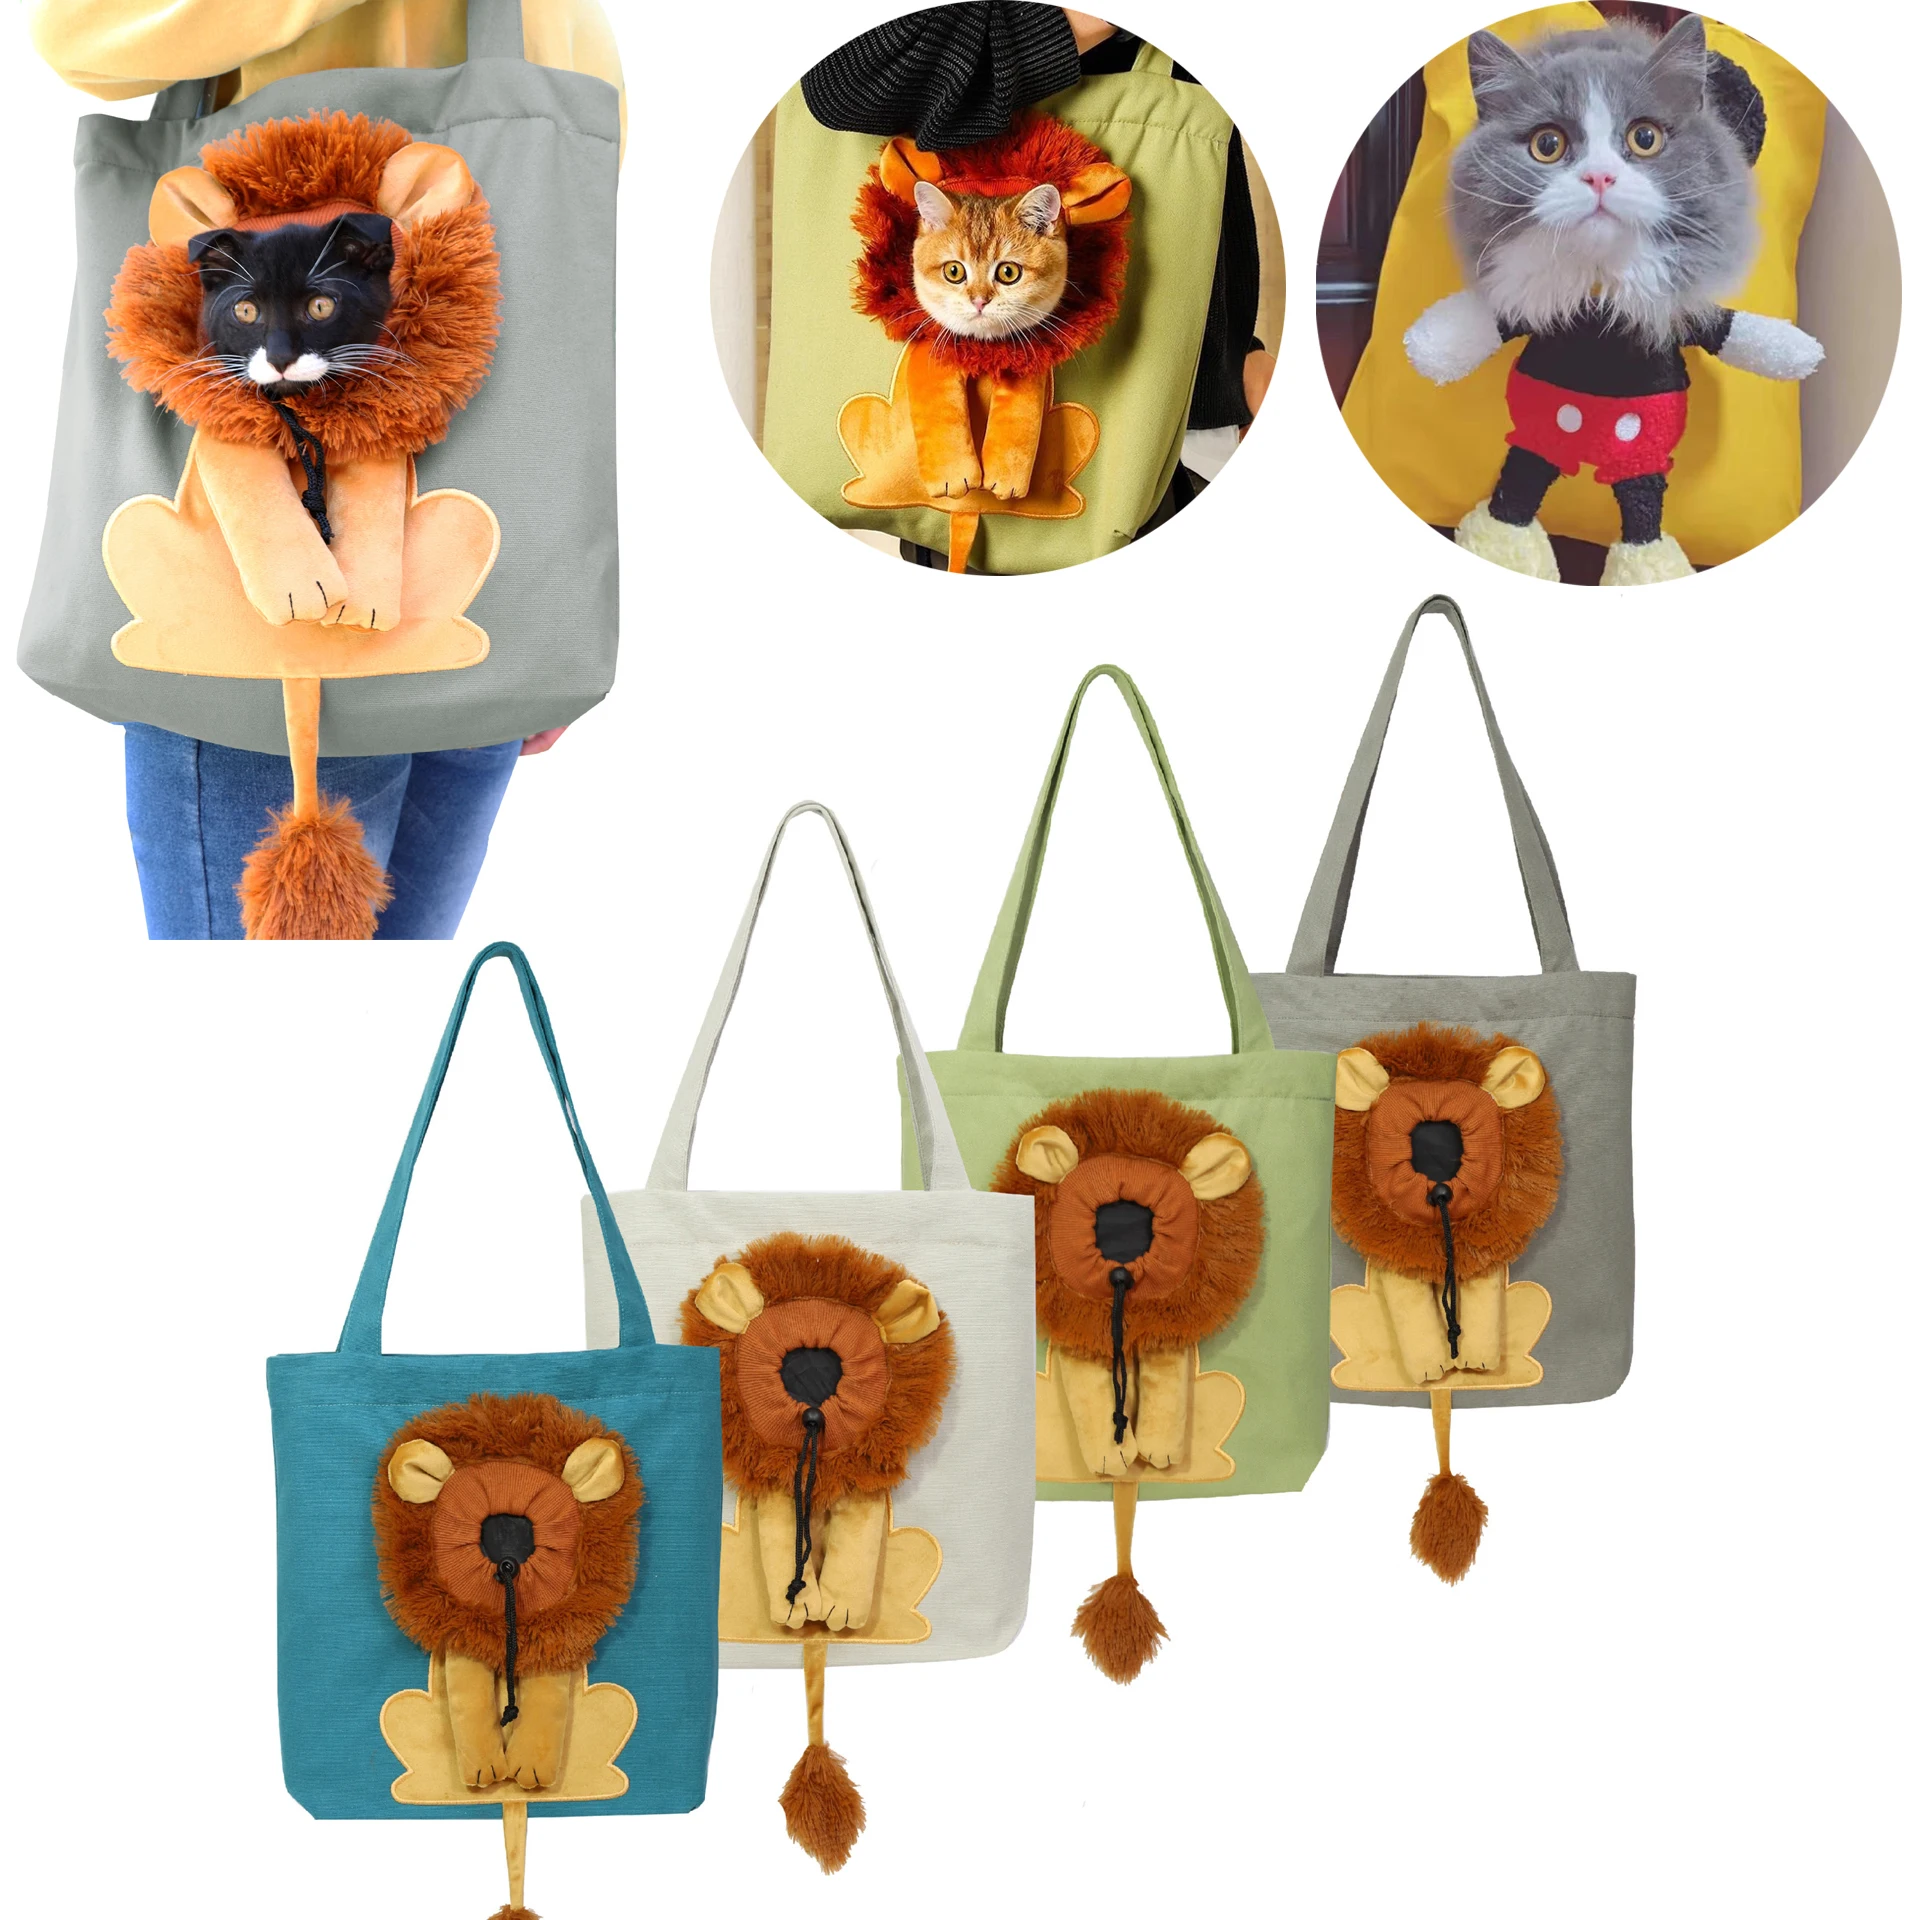 

Design Pet Bag Breathable Soft Carrier Pets Carriers Cat Portable Handbag With Safety Outgoing Bags Zippers Lion Dog Travel